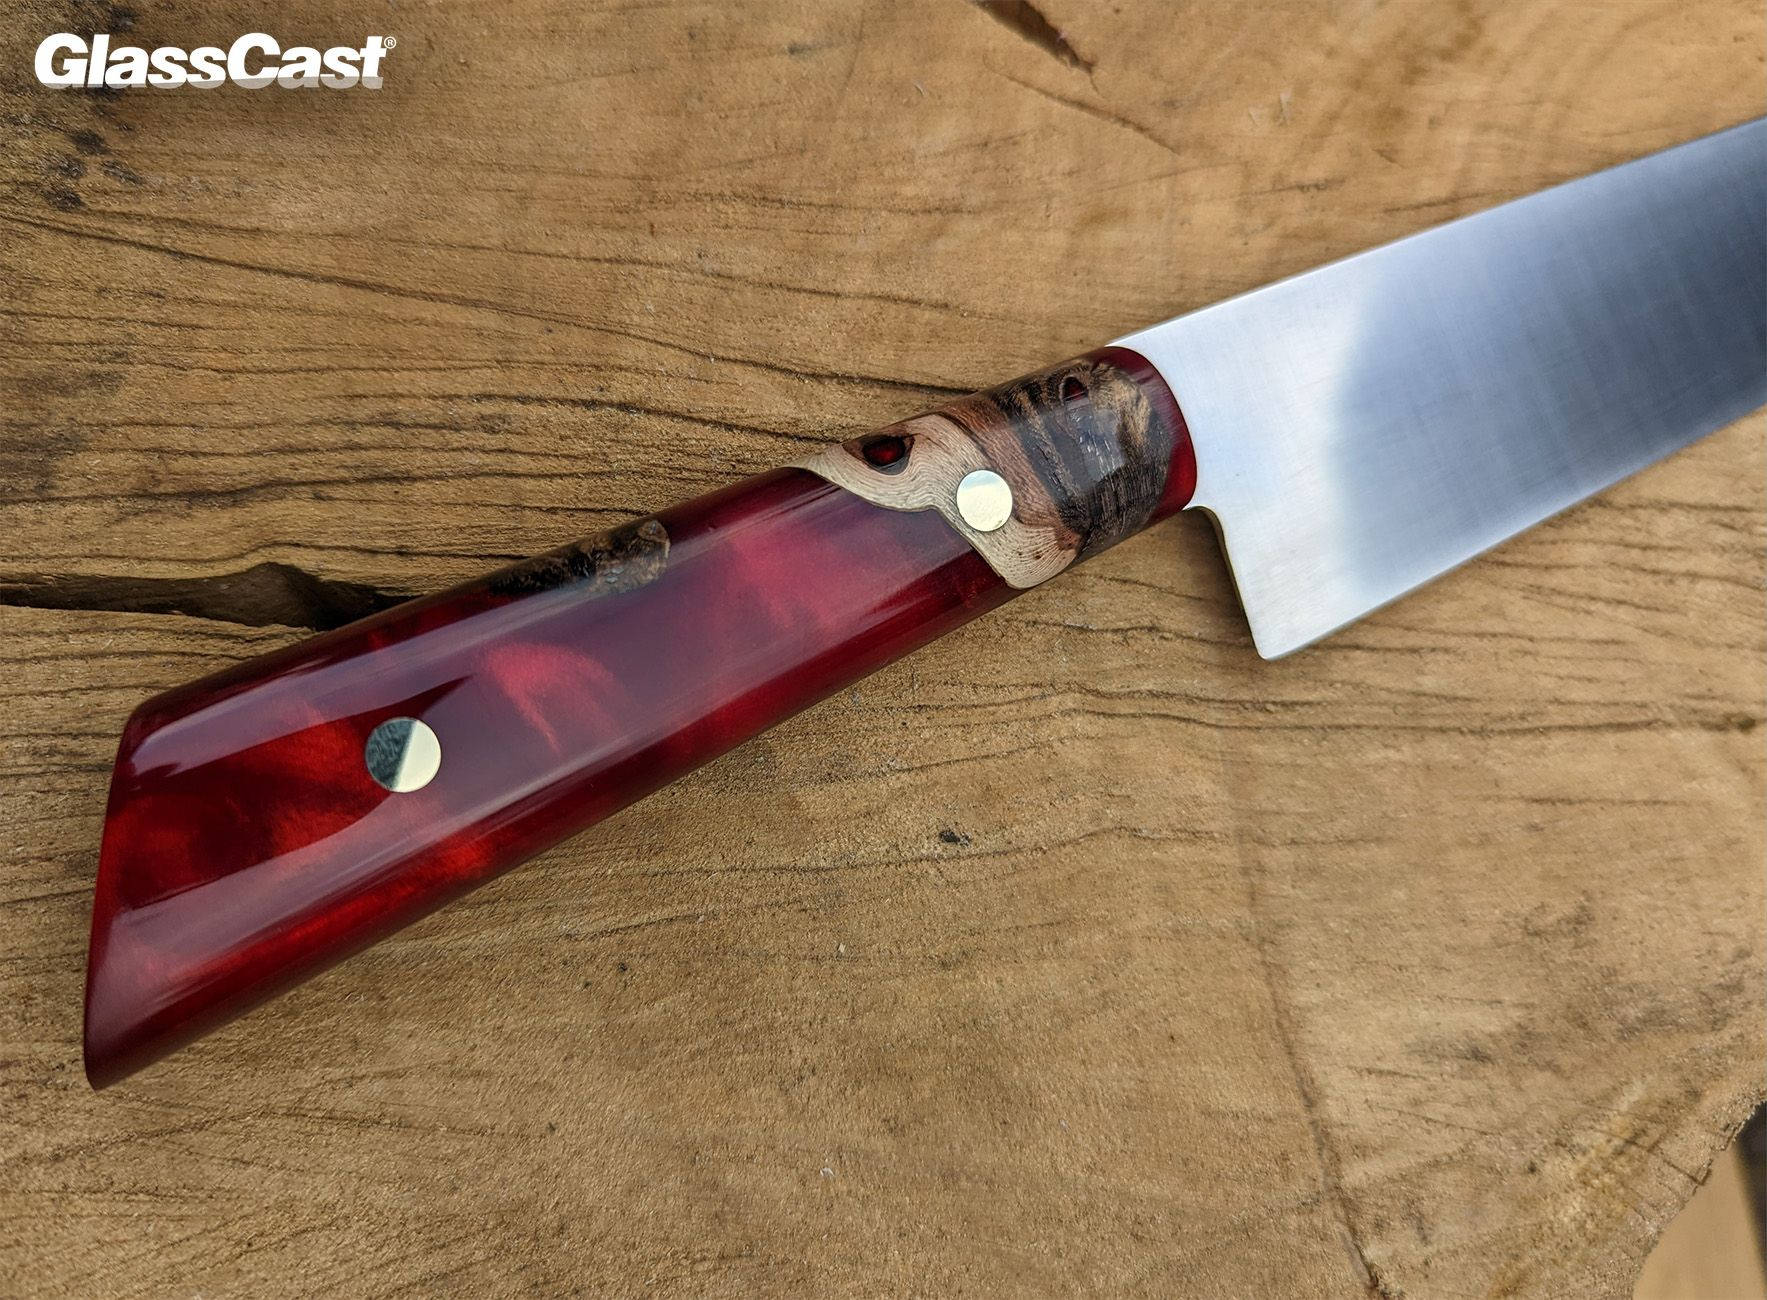 Resin and Fir Cone Knife Handles - GlassCast